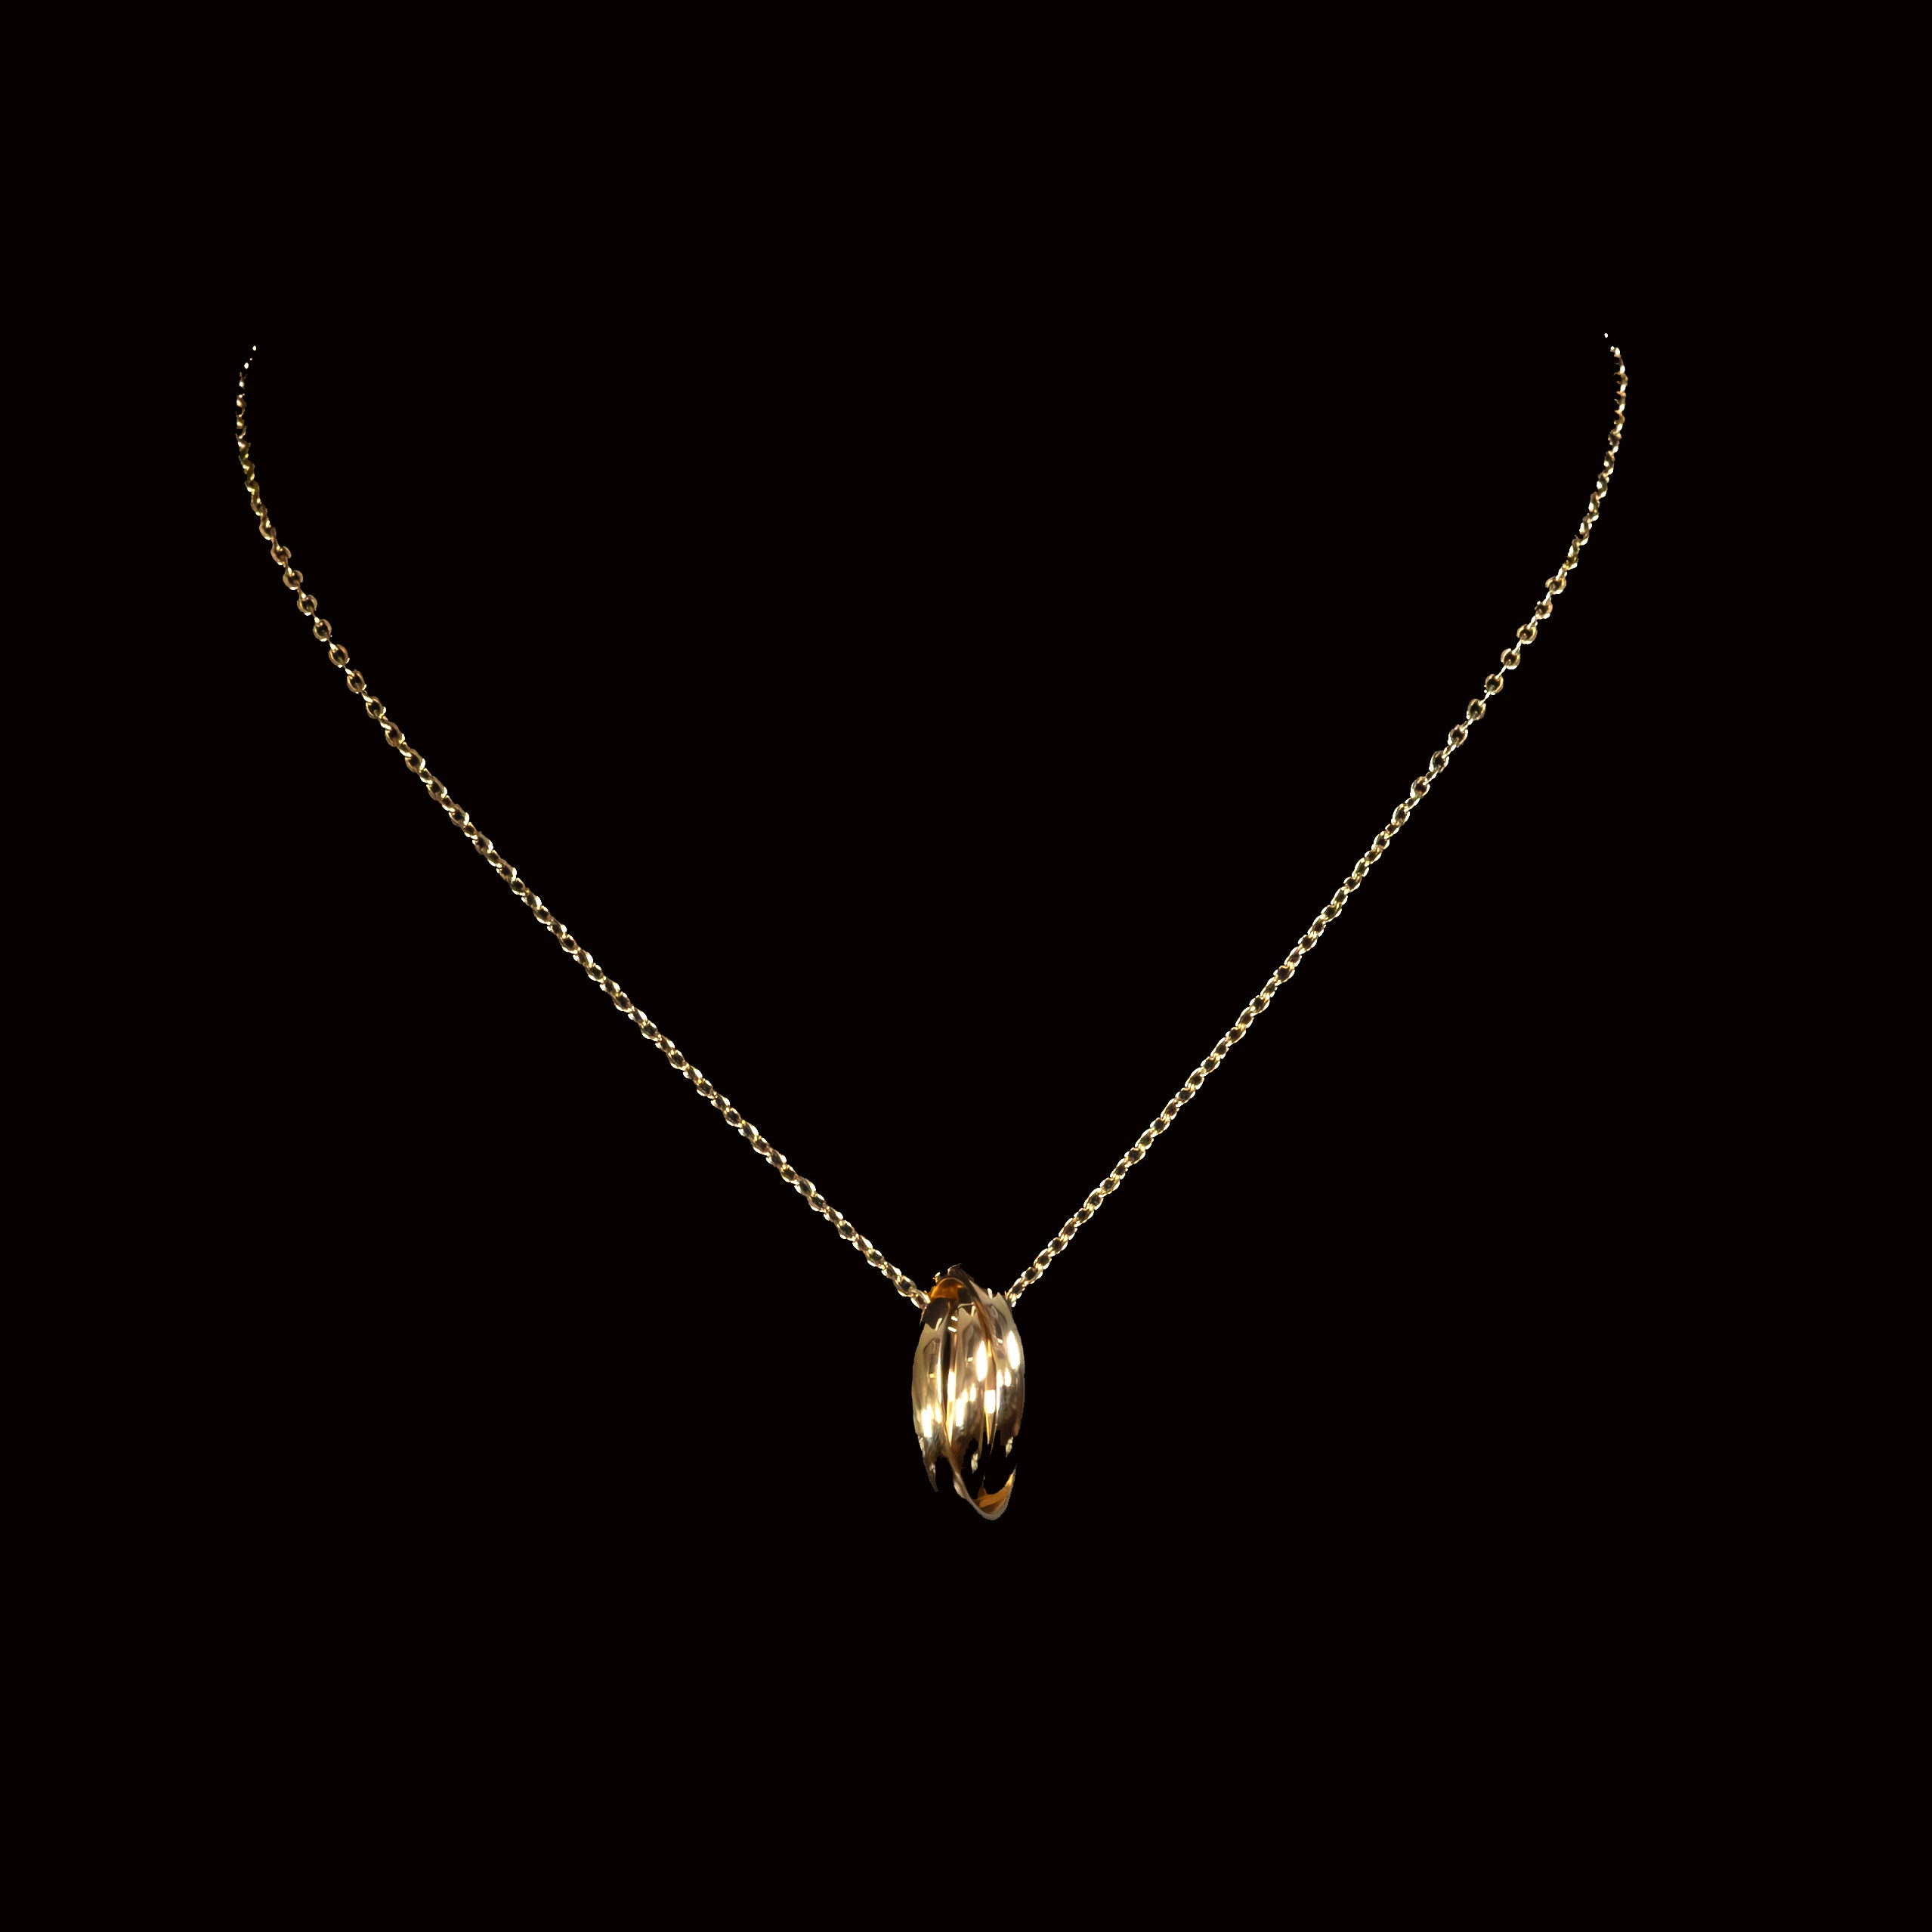 Latham Stainless Steel Necklace with Interlock Pendant